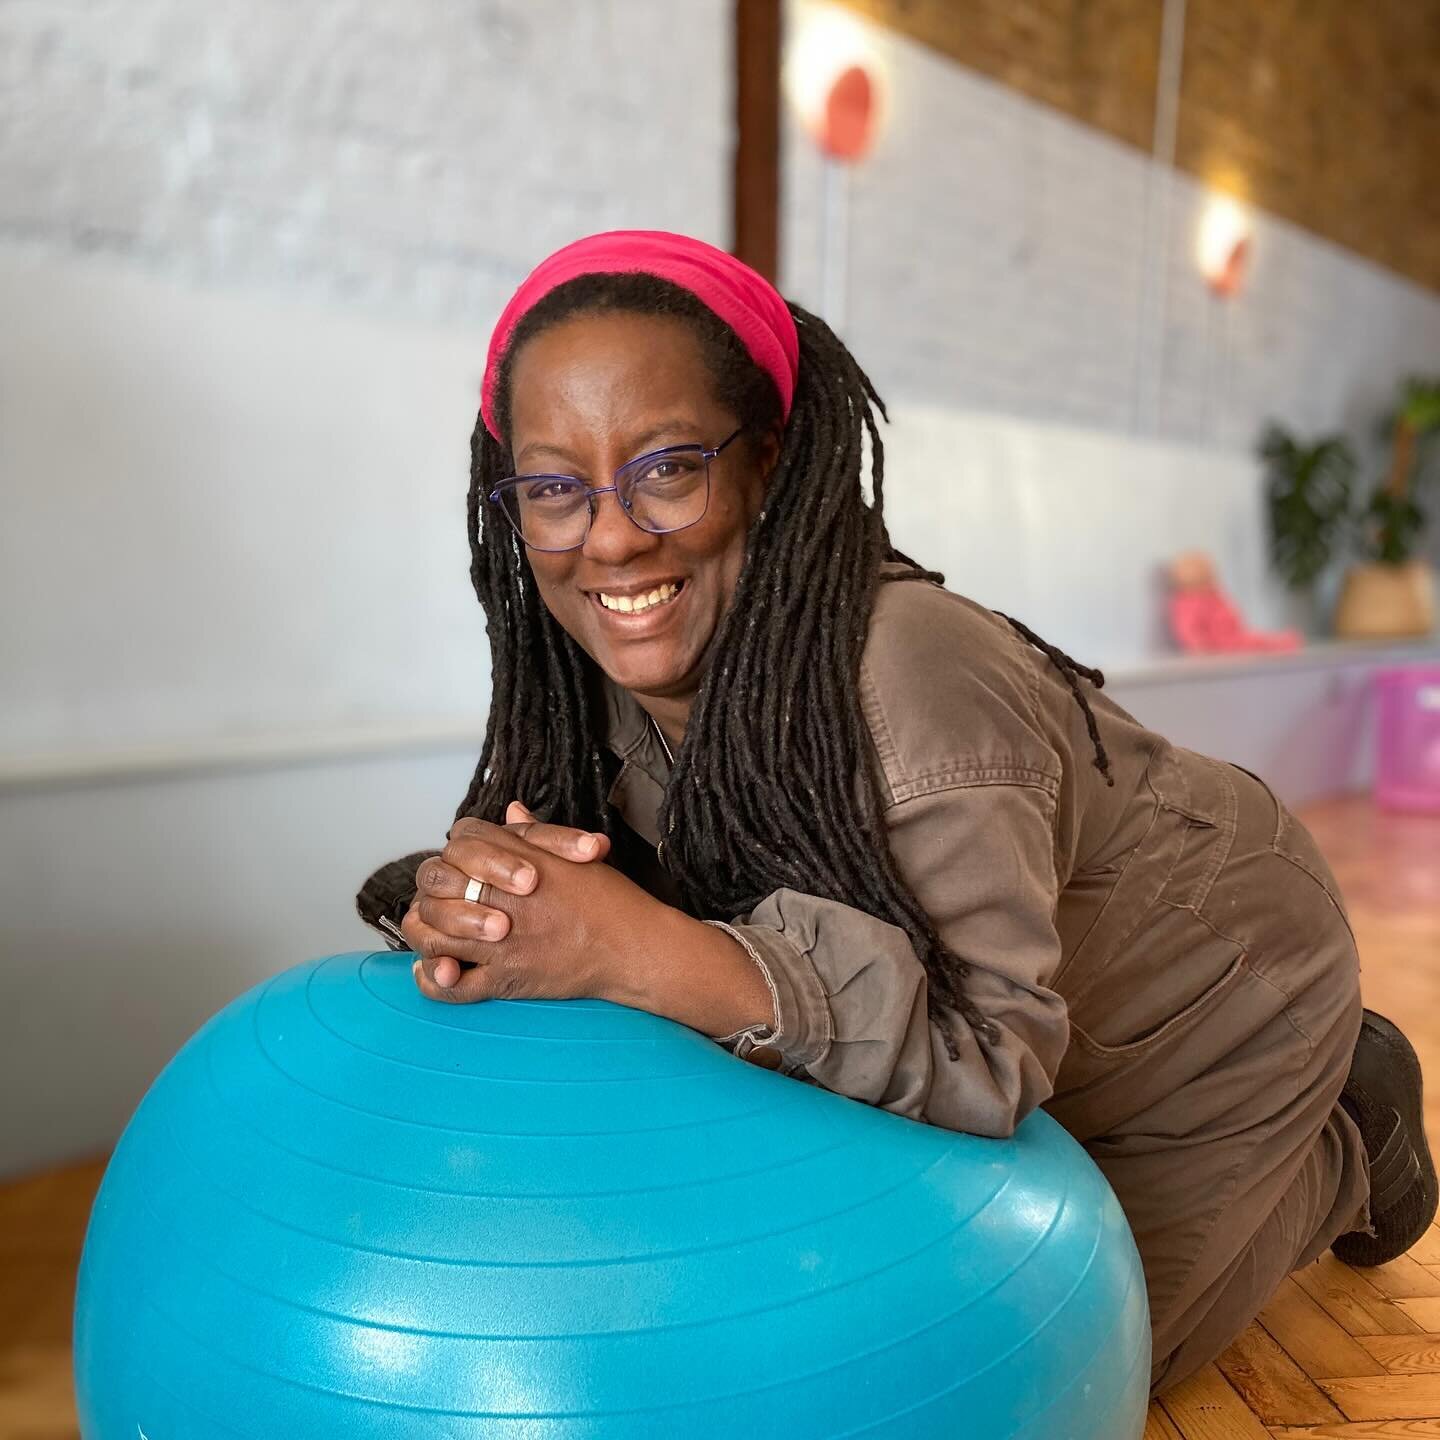 At the final day of our pilot antenatal course in Margate, funded by @kcc_kent we donated a fabric wrap sling and pregnancy yoga ball to each lady that attended (donated from our wonderful community)

Our amazing host @_marslord demonstrated how to t